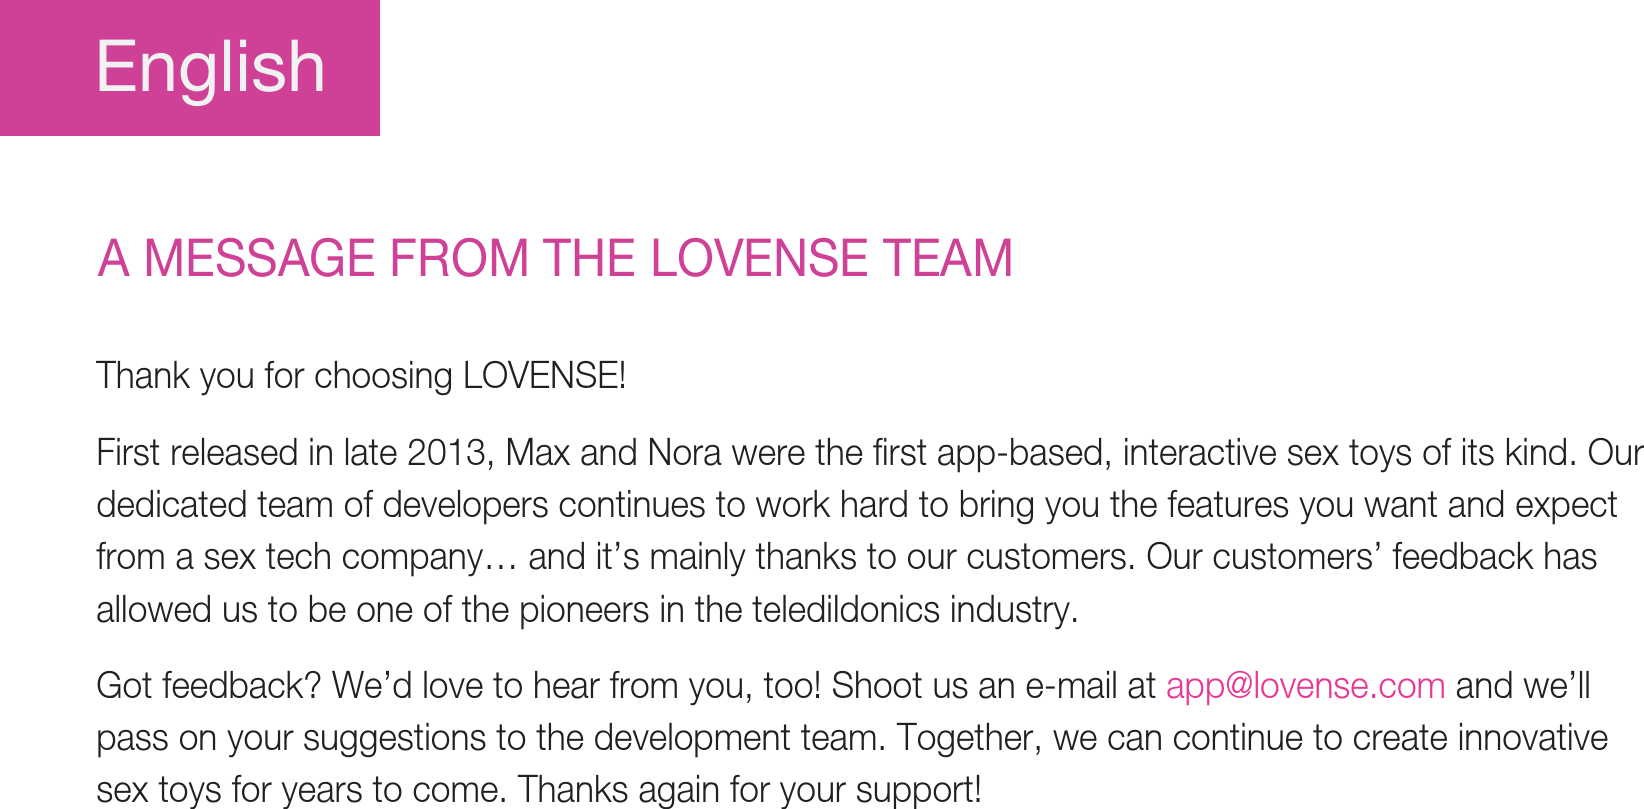 EnglishA MESSAGE FROM THE LOVENSE TEAMThank you for choosing LOVENSE! First released in late 2013, Max and Nora were the first app-based, interactive sex toys of its kind. Our dedicated team of developers continues to work hard to bring you the features you want and expect from a sex tech company… and it’s mainly thanks to our customers. Our customers’ feedback has allowed us to be one of the pioneers in the teledildonics industry. Got feedback? We’d love to hear from you, too! Shoot us an e-mail at app@lovense.com and we’ll pass on your suggestions to the development team. Together, we can continue to create innovative sex toys for years to come. Thanks again for your support! 